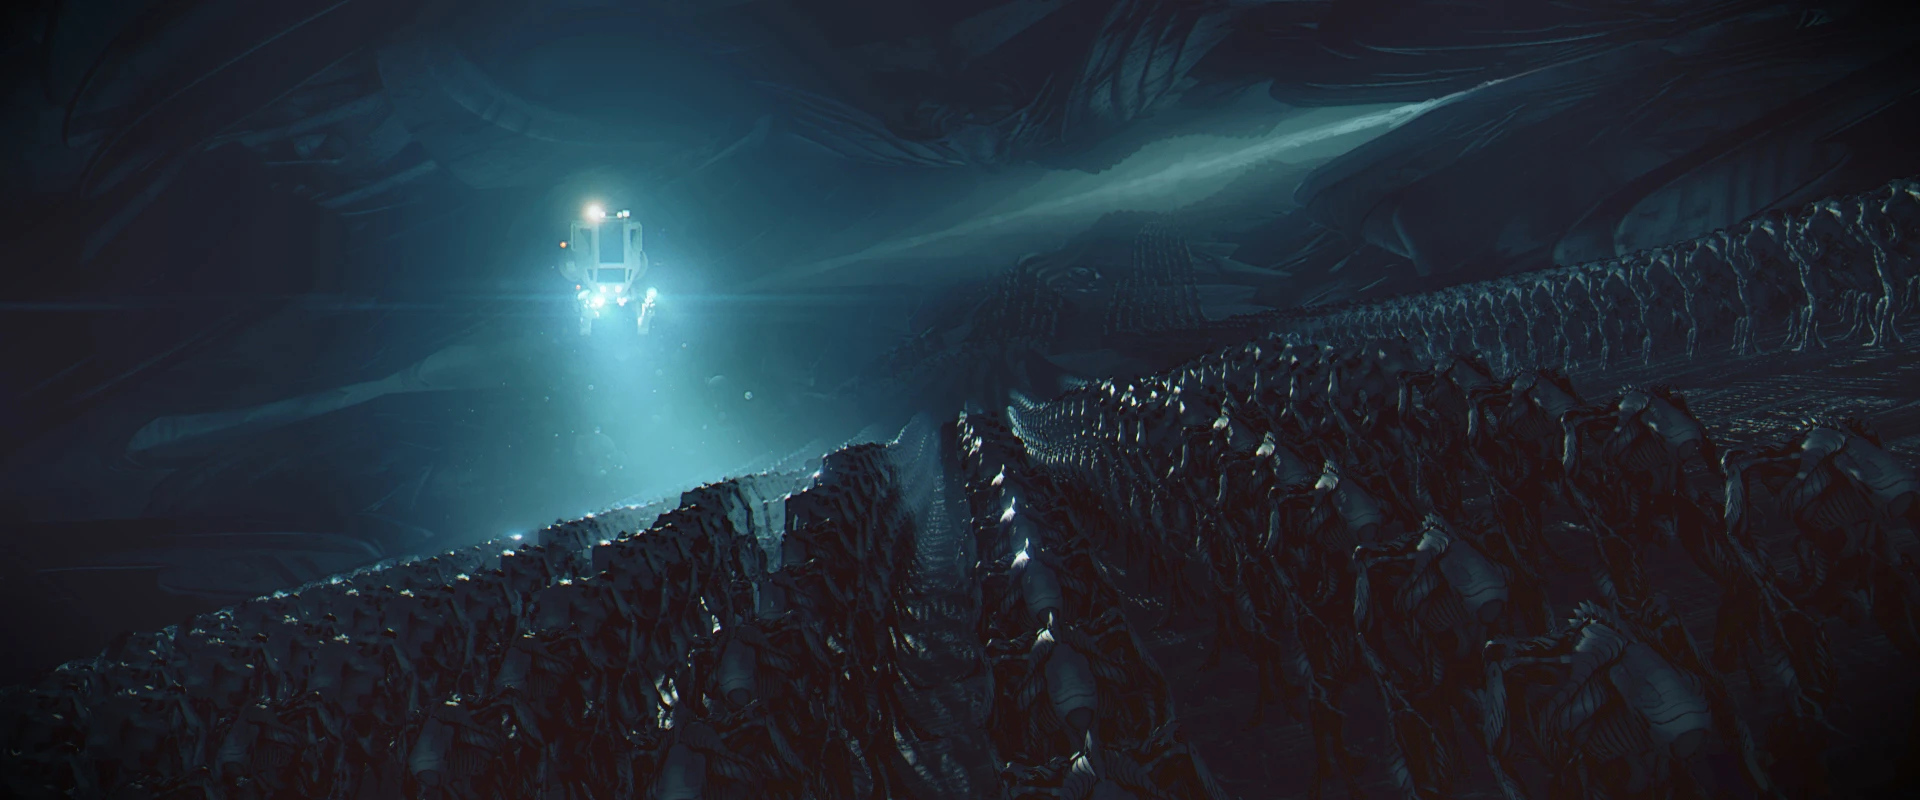 Army in a dark space view concept art from Raynault vfx